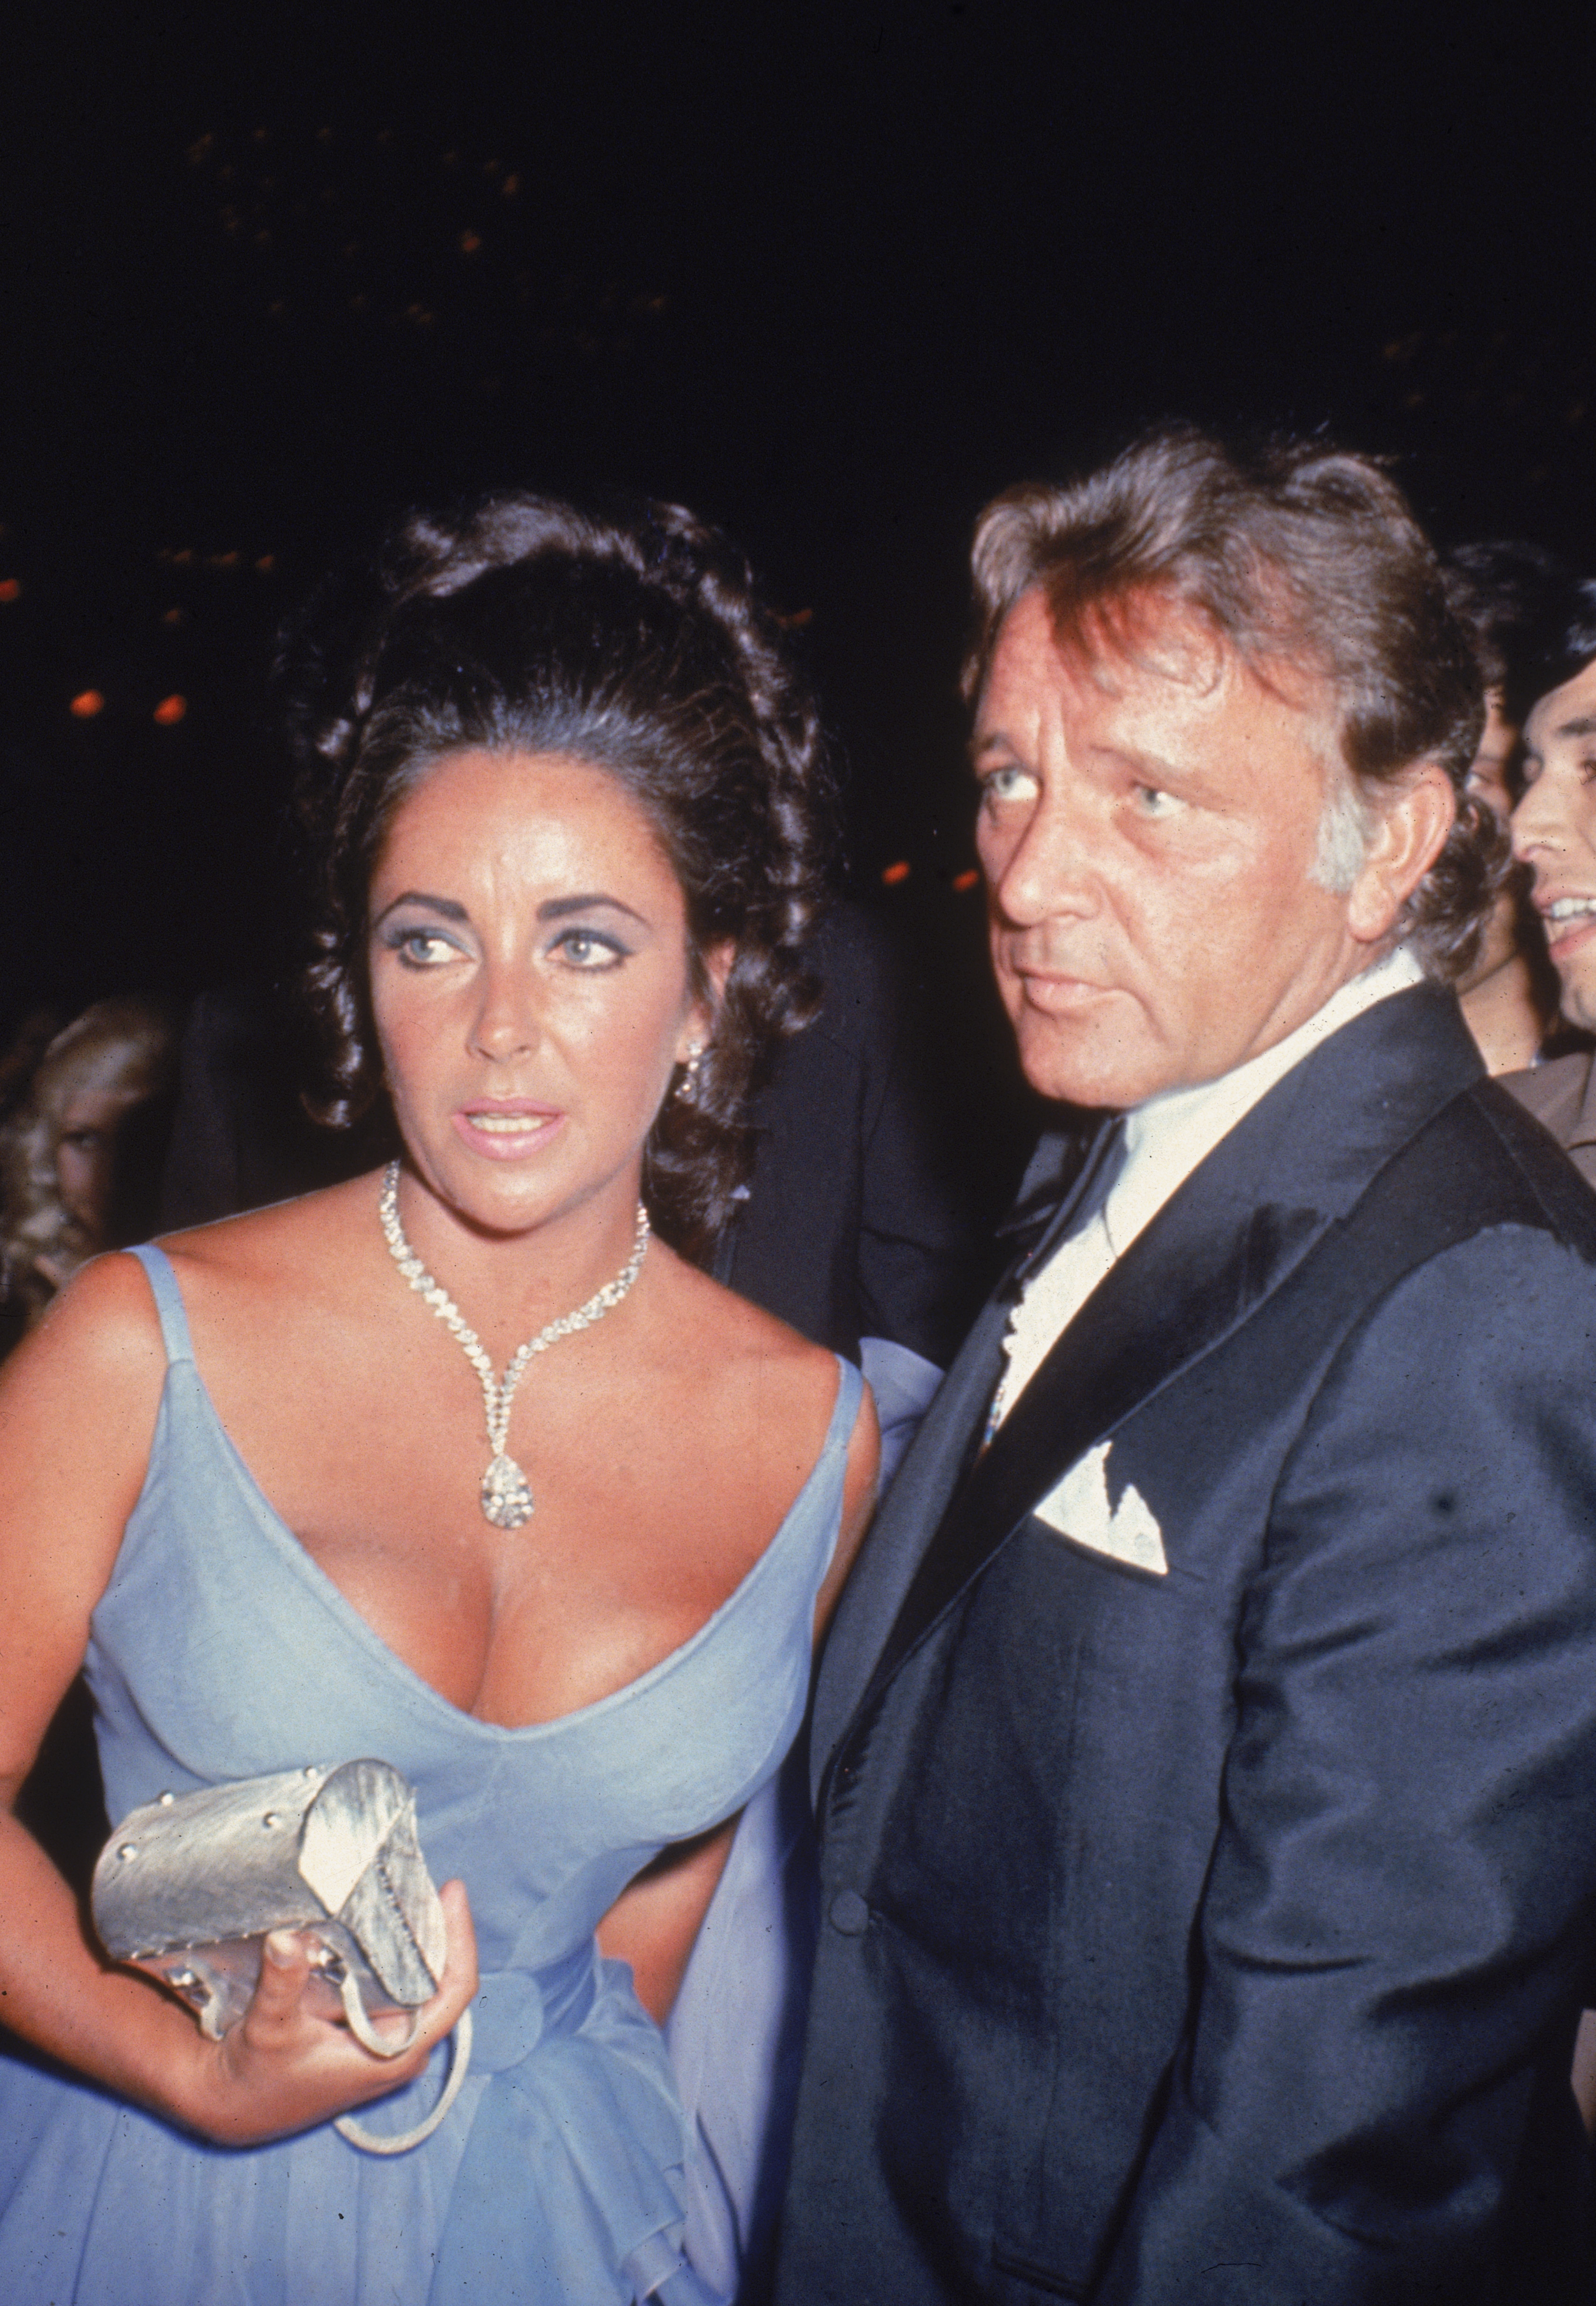 Elizabeth Taylor and Richard Burton attend the Academy Awards ceremonies on April 7, 1970, in Los Angeles, California. | Source: Getty Images